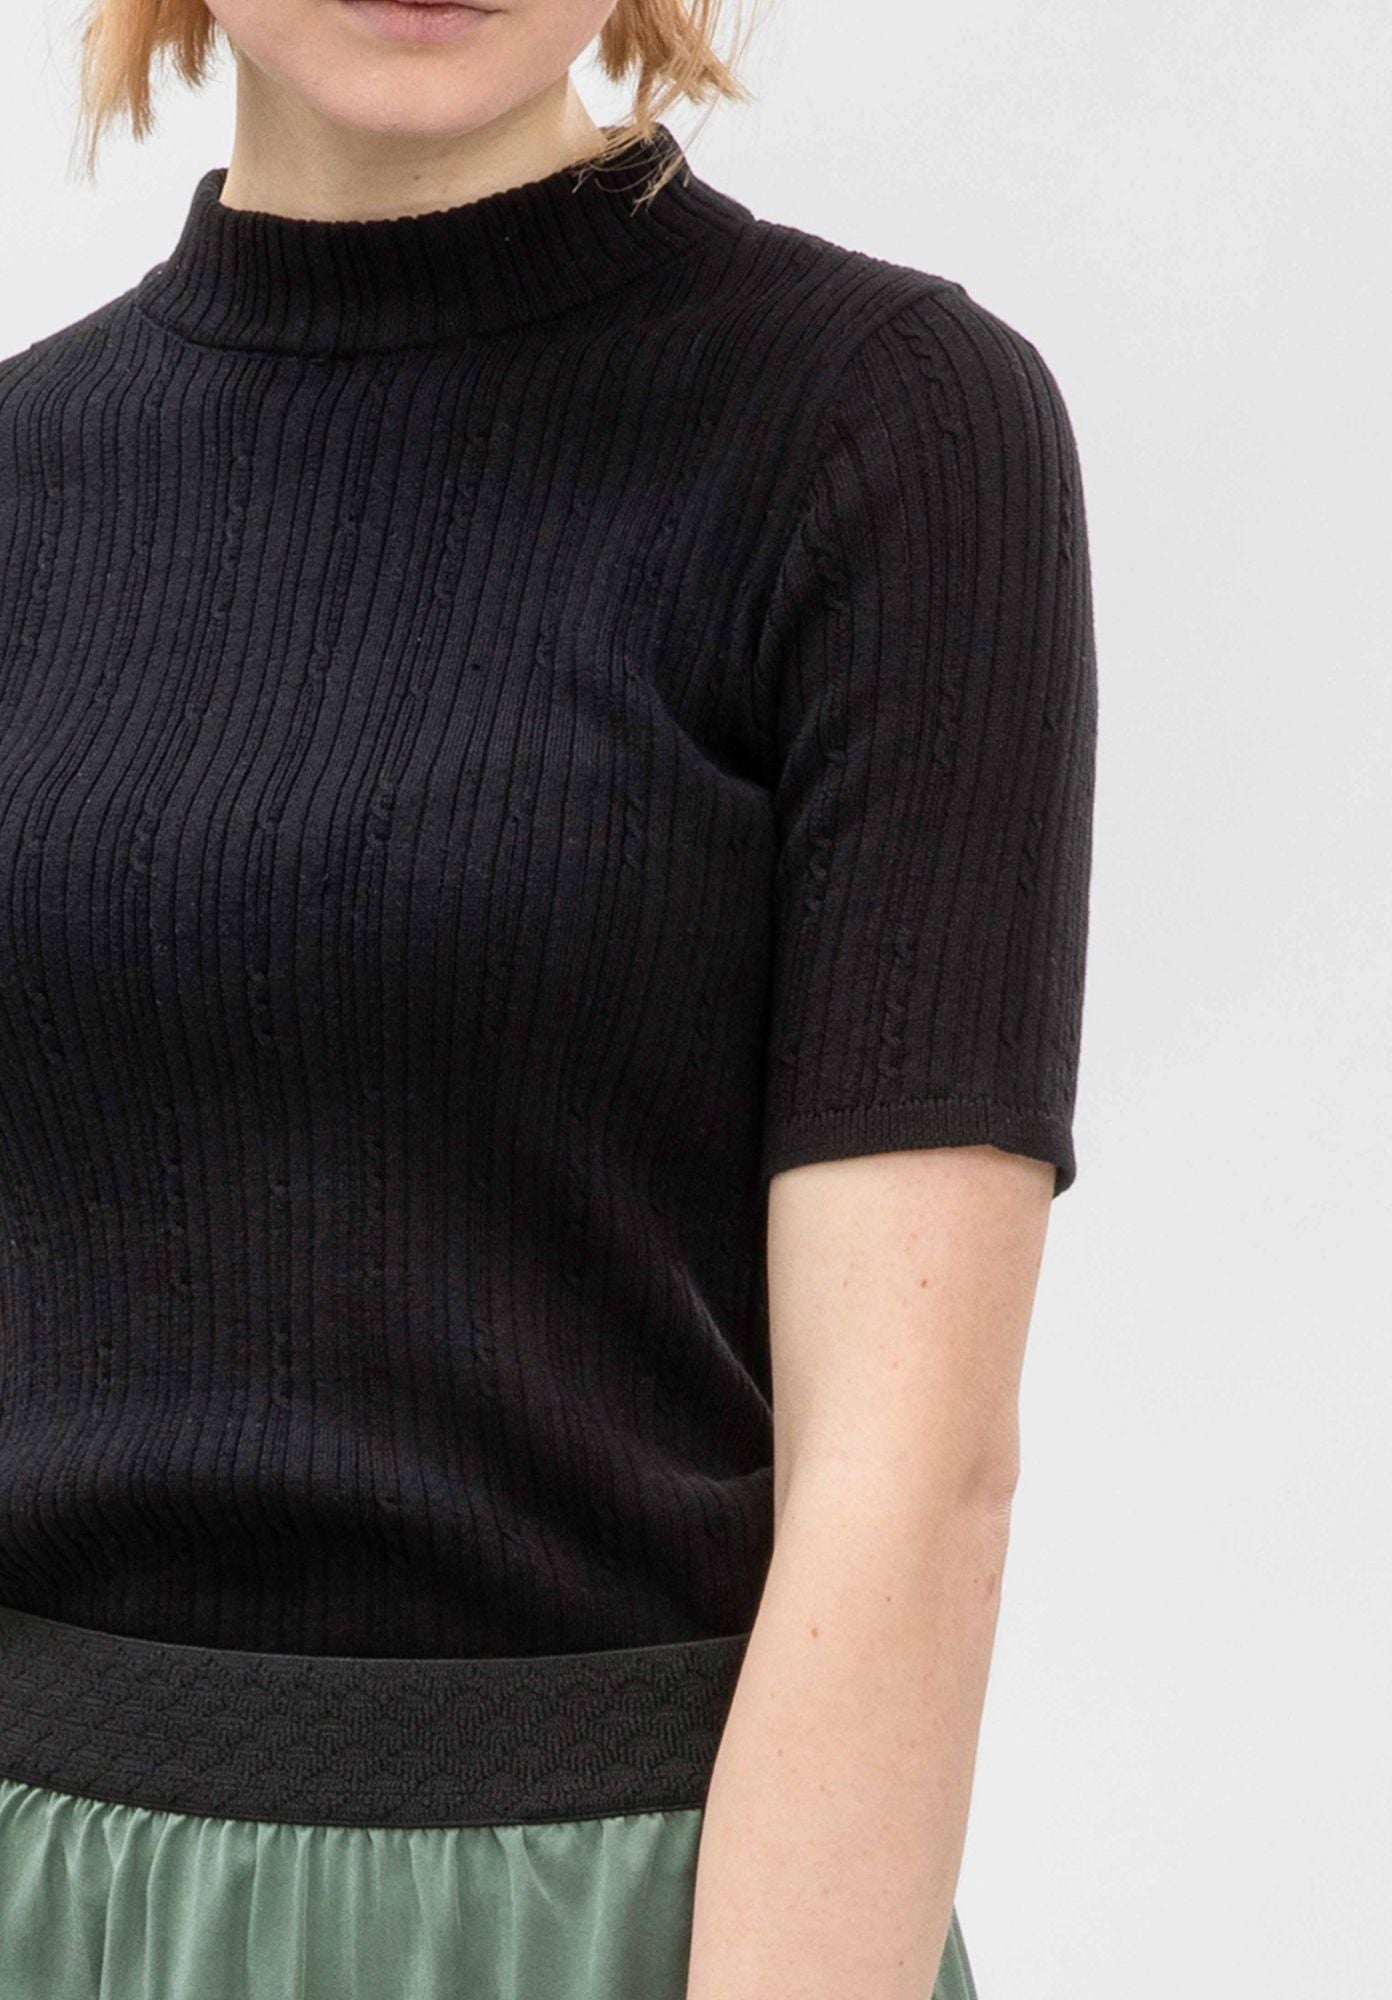 Knitted top IDALA in black by LOVJOI made of organic cotton